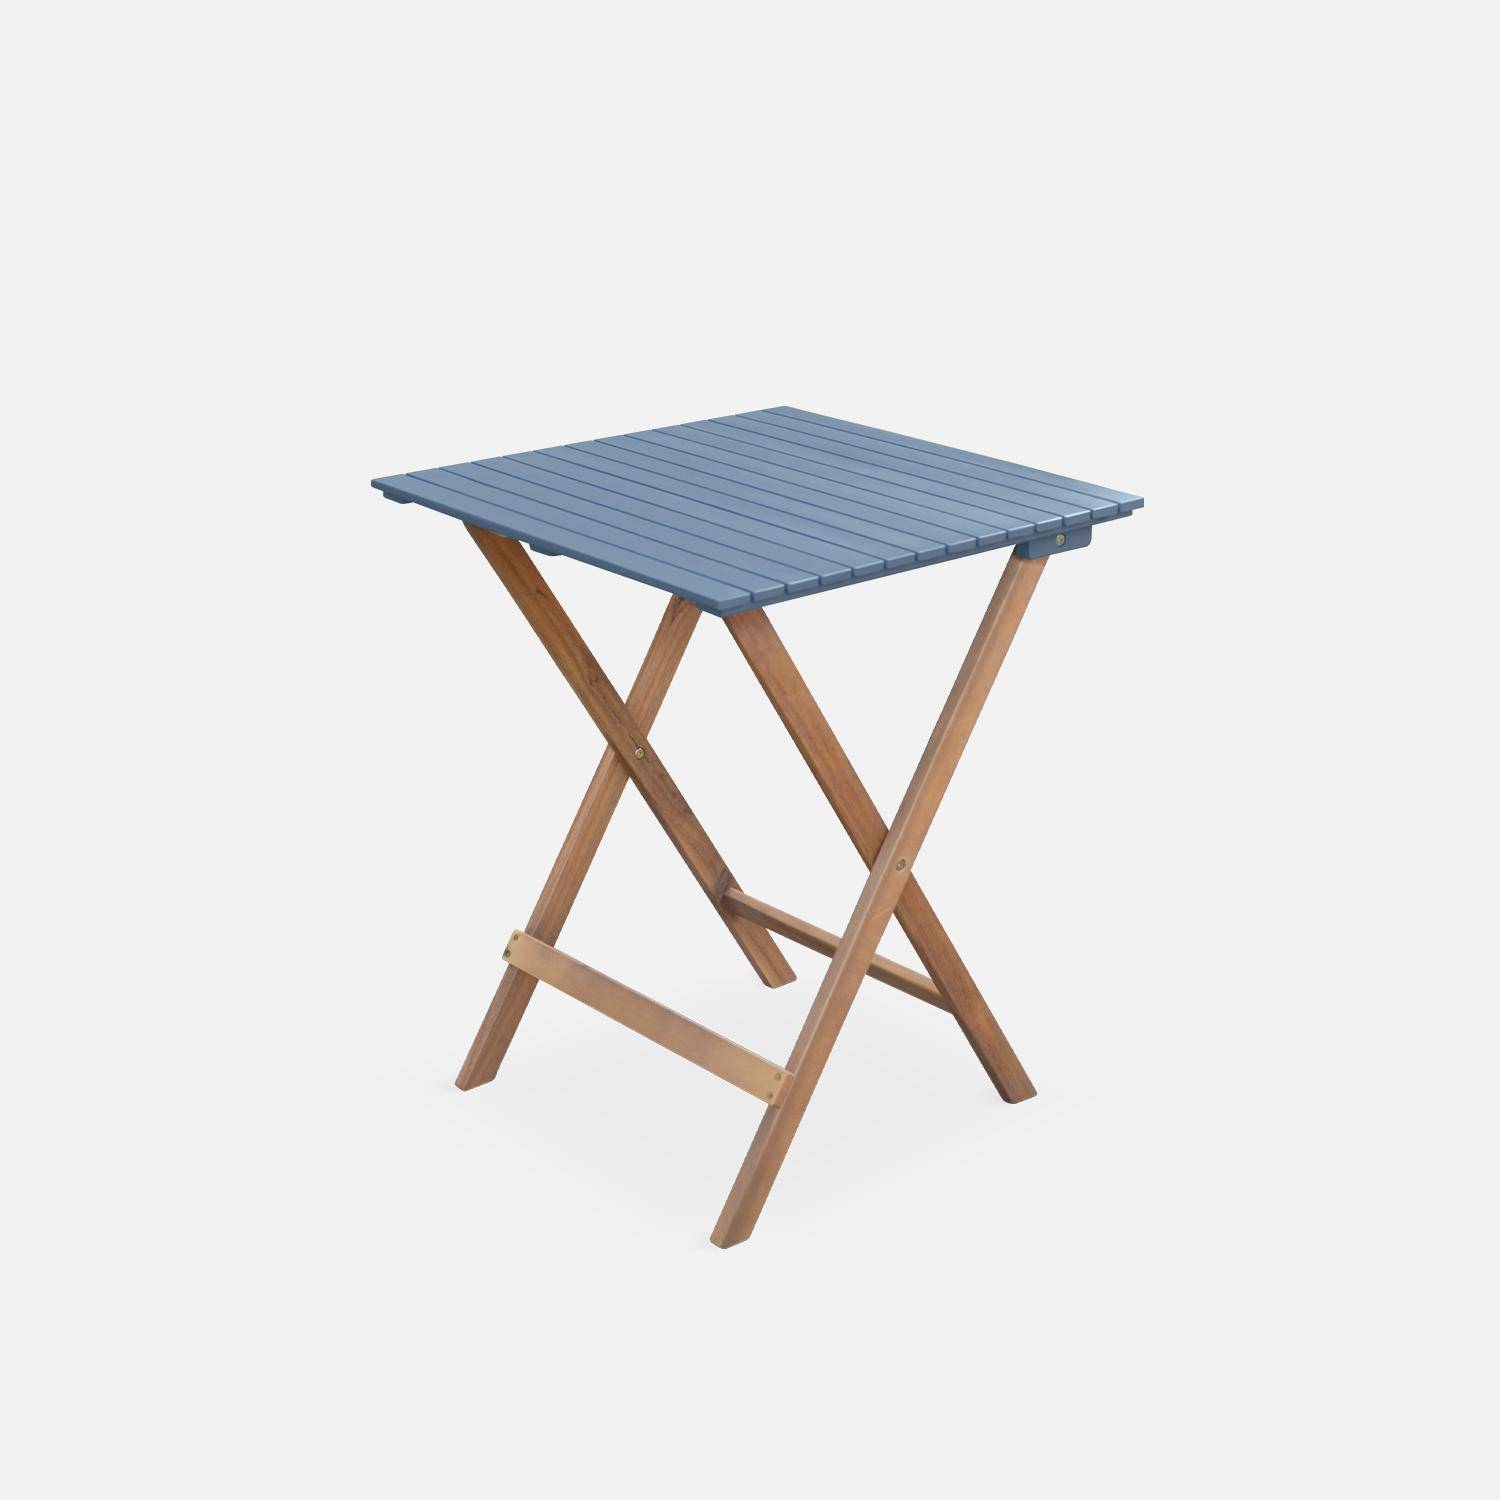 2-seater foldable wooden bistro garden table with chairs, 60x60cm - Barcelona - Grey Blue Photo6